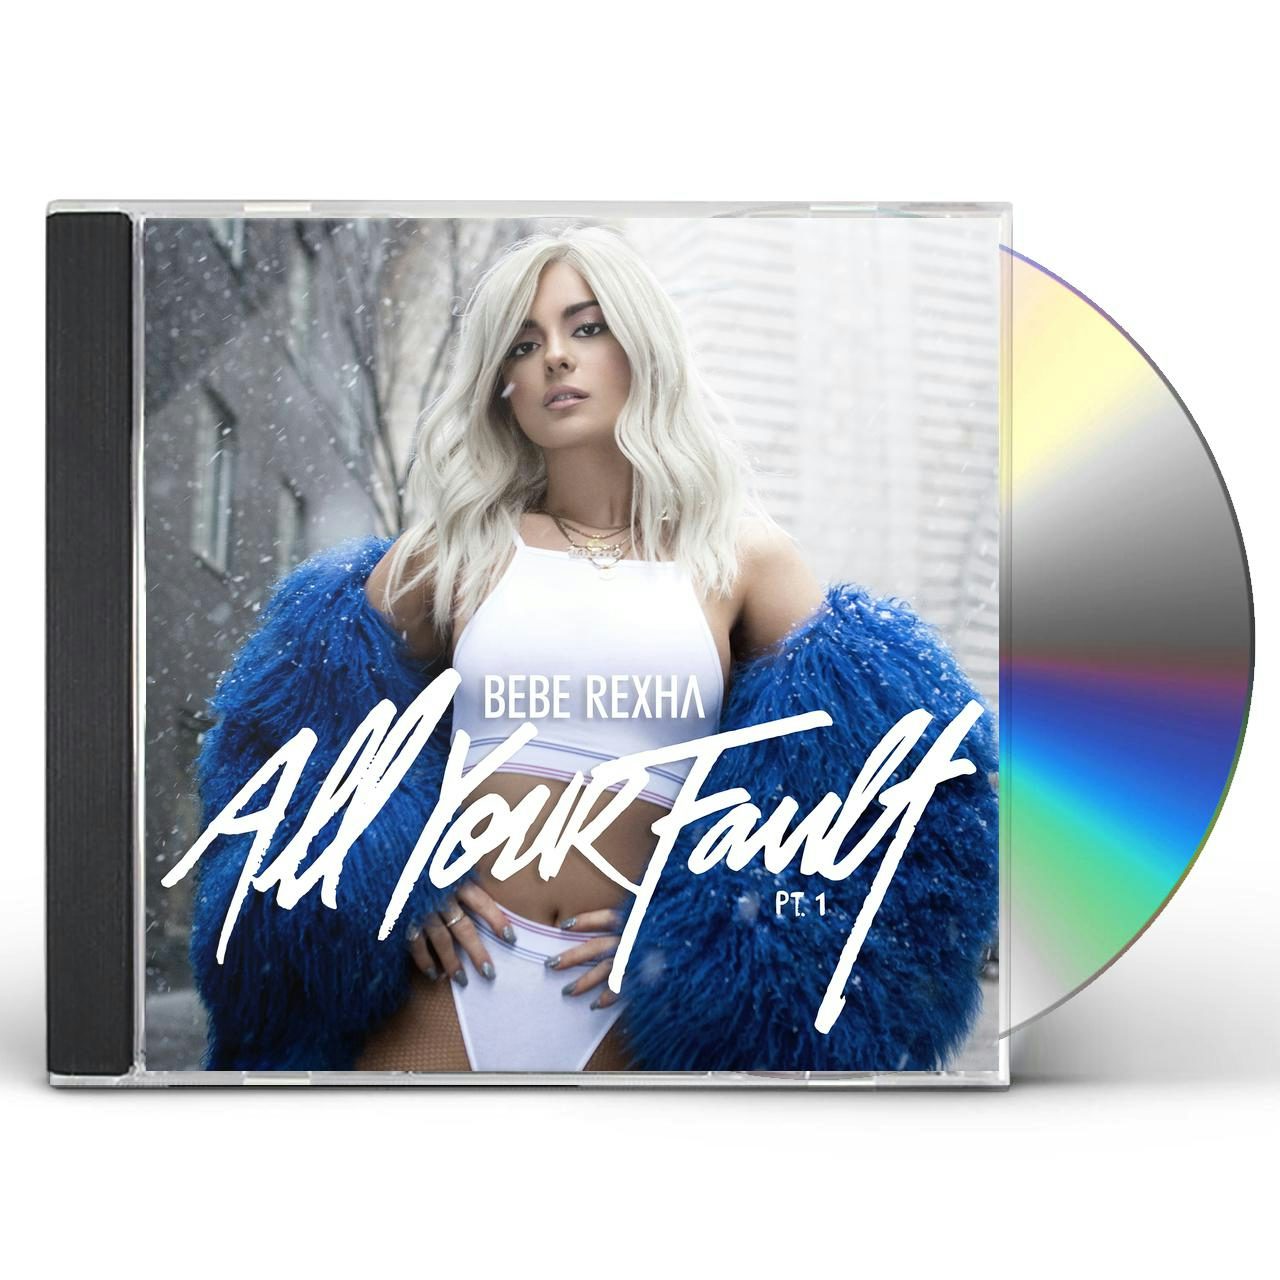 Bebe Rexha ALL YOUR FAULT PART 1 CD